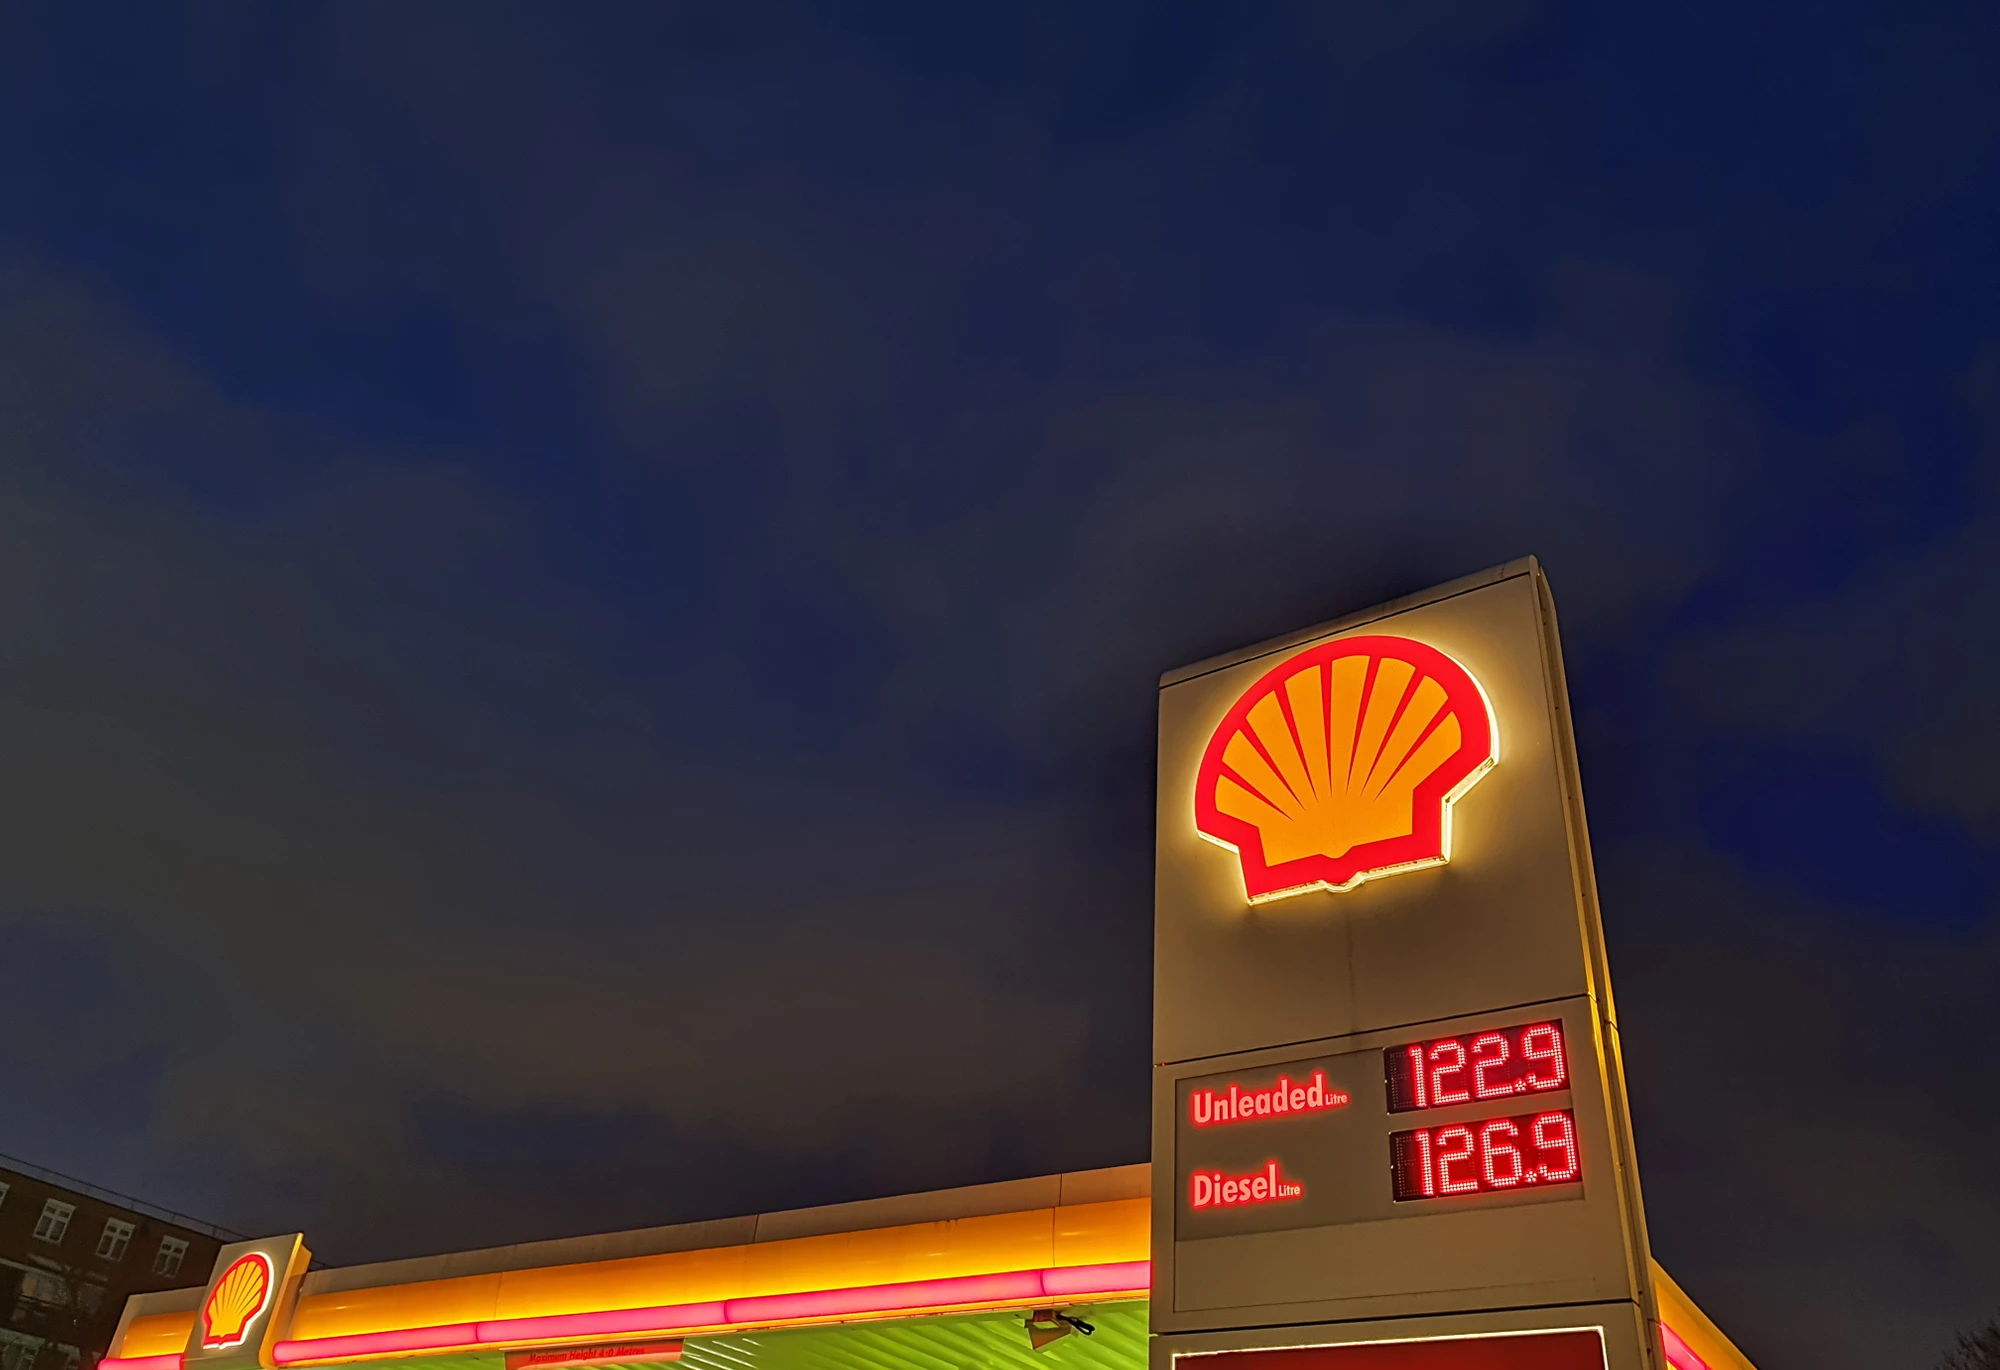 Shell ‘Drive Carbon Neutral’ claims in doubt after forest scrutiny